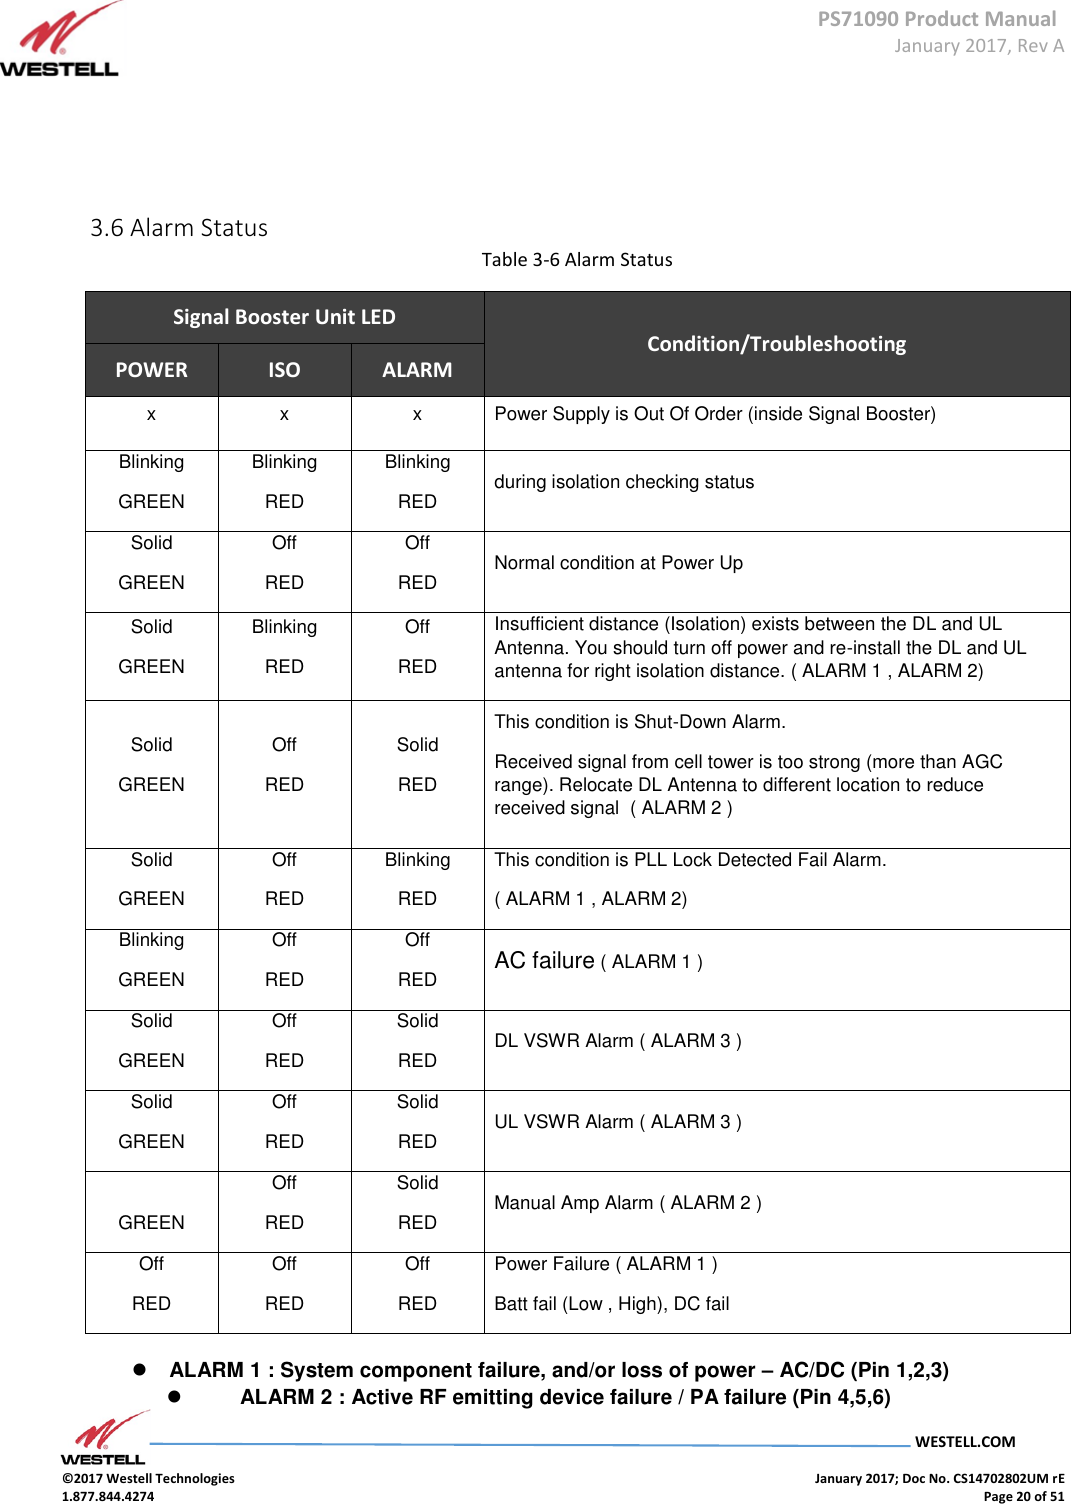 PS71090 Product Manual  January 2017, Rev A  WESTELL.COM  ©2017 Westell Technologies    January 2017; Doc No. CS14702802UM rE 1.877.844.4274    Page 20 of 51     3.6 Alarm Status Table 3-6 Alarm Status Signal Booster Unit LED Condition/Troubleshooting POWER ISO ALARM x x x Power Supply is Out Of Order (inside Signal Booster) Blinking GREEN Blinking RED Blinking RED during isolation checking status  Solid GREEN Off RED Off RED Normal condition at Power Up  Solid GREEN Blinking RED Off RED Insufficient distance (Isolation) exists between the DL and UL Antenna. You should turn off power and re-install the DL and UL antenna for right isolation distance. ( ALARM 1 , ALARM 2) Solid GREEN Off RED Solid RED This condition is Shut-Down Alarm. Received signal from cell tower is too strong (more than AGC range). Relocate DL Antenna to different location to reduce received signal  ( ALARM 2 ) Solid GREEN Off RED Blinking RED This condition is PLL Lock Detected Fail Alarm.  ( ALARM 1 , ALARM 2) Blinking GREEN Off RED Off RED AC failure ( ALARM 1 ) Solid GREEN Off RED Solid RED DL VSWR Alarm ( ALARM 3 ) Solid GREEN Off RED Solid RED UL VSWR Alarm ( ALARM 3 )  GREEN Off RED Solid RED Manual Amp Alarm ( ALARM 2 ) Off RED Off RED Off RED Power Failure ( ALARM 1 ) Batt fail (Low , High), DC fail   ALARM 1 : System component failure, and/or loss of power – AC/DC (Pin 1,2,3)  ALARM 2 : Active RF emitting device failure / PA failure (Pin 4,5,6) 